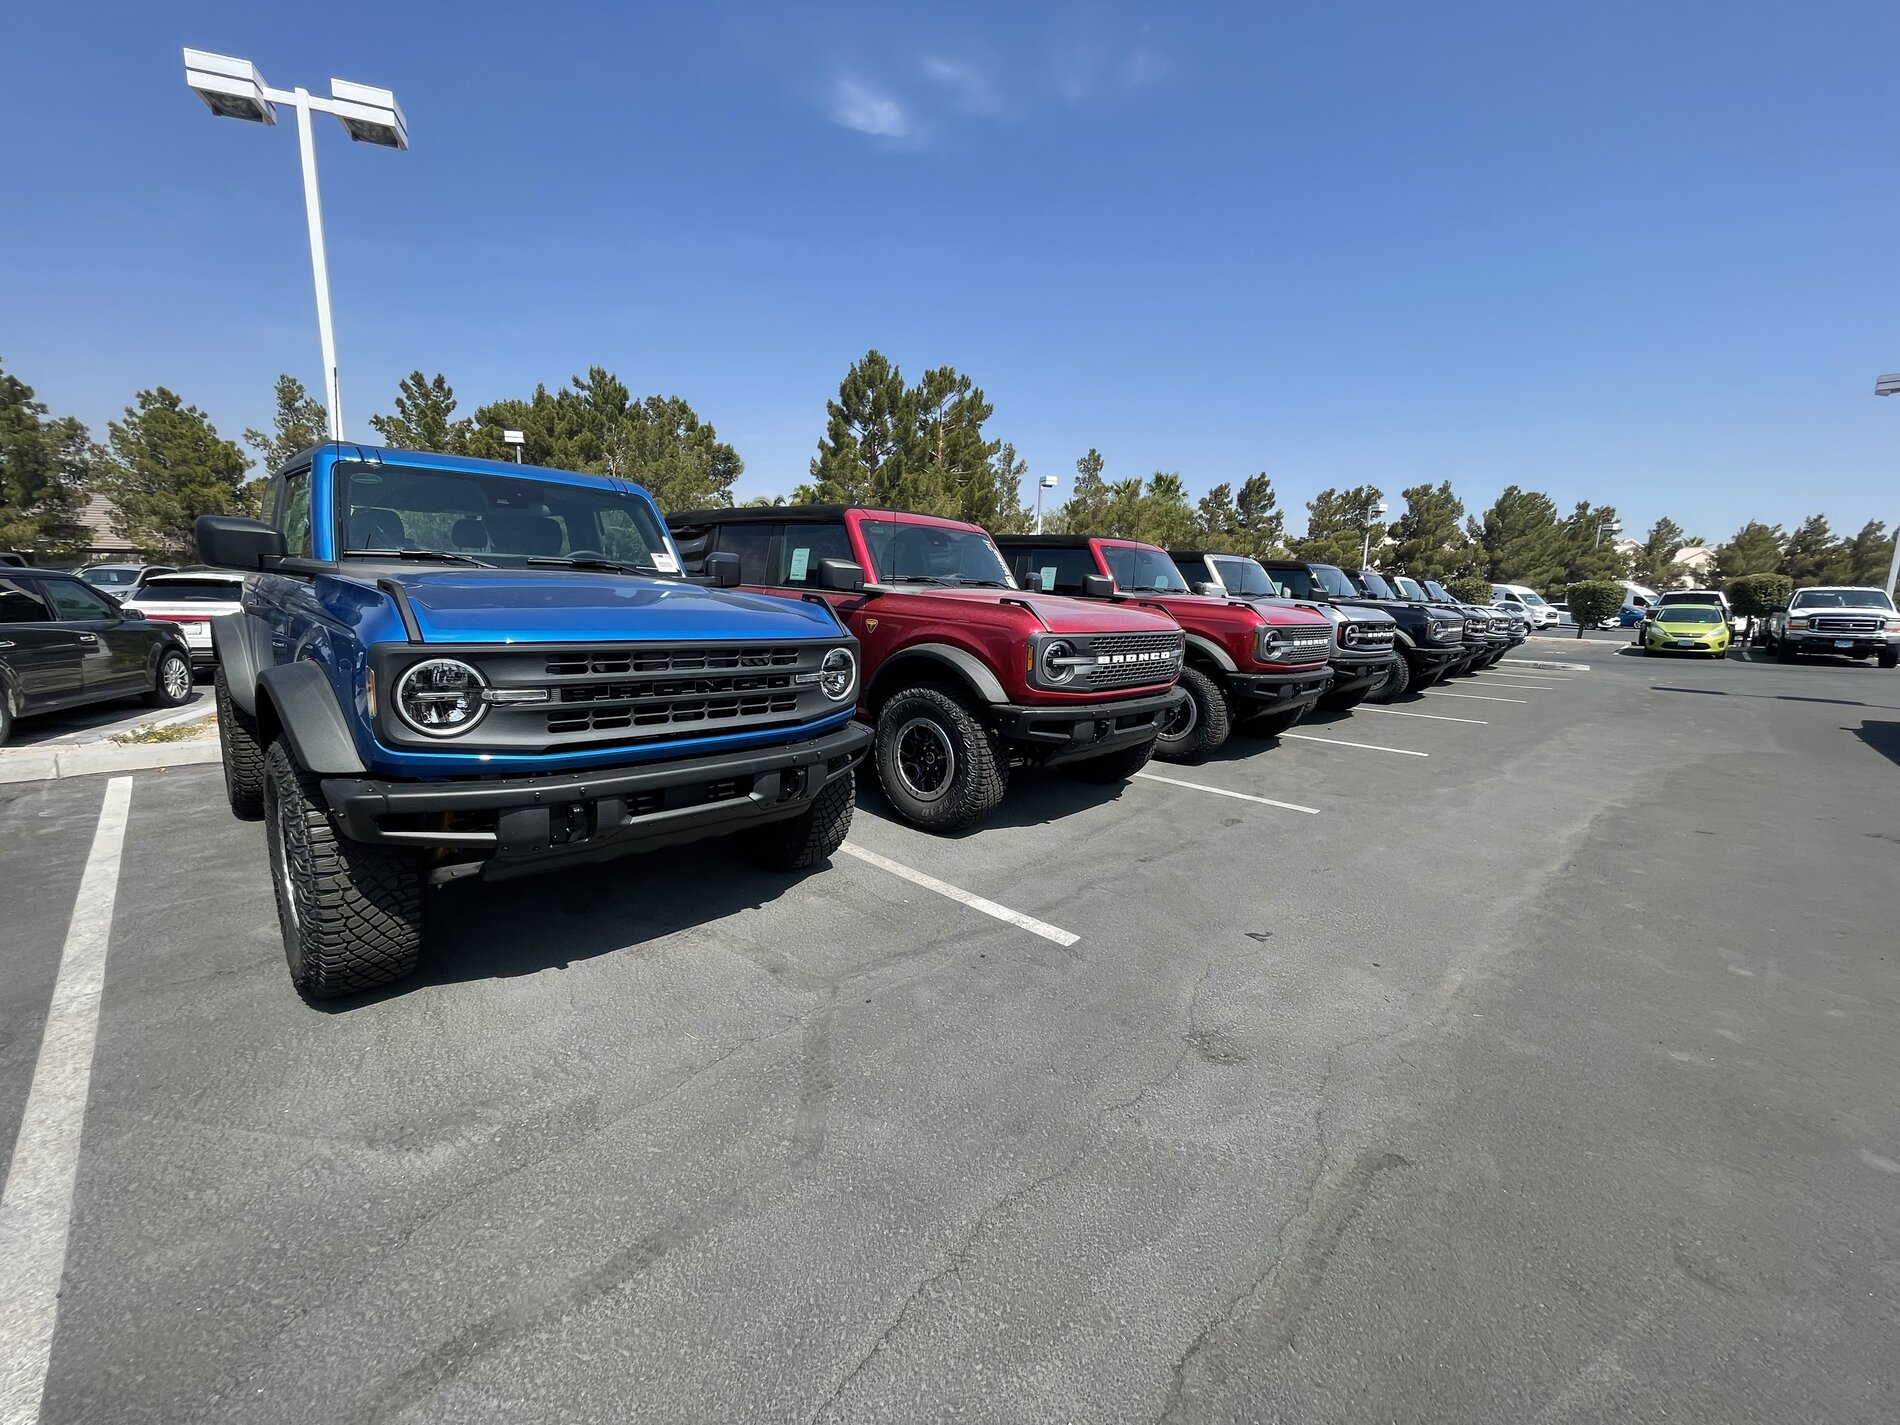 Ford Bronco Bronco spotting at my local dealership. 460092AB-9911-4DC2-8D60-166E5AC1FC4C